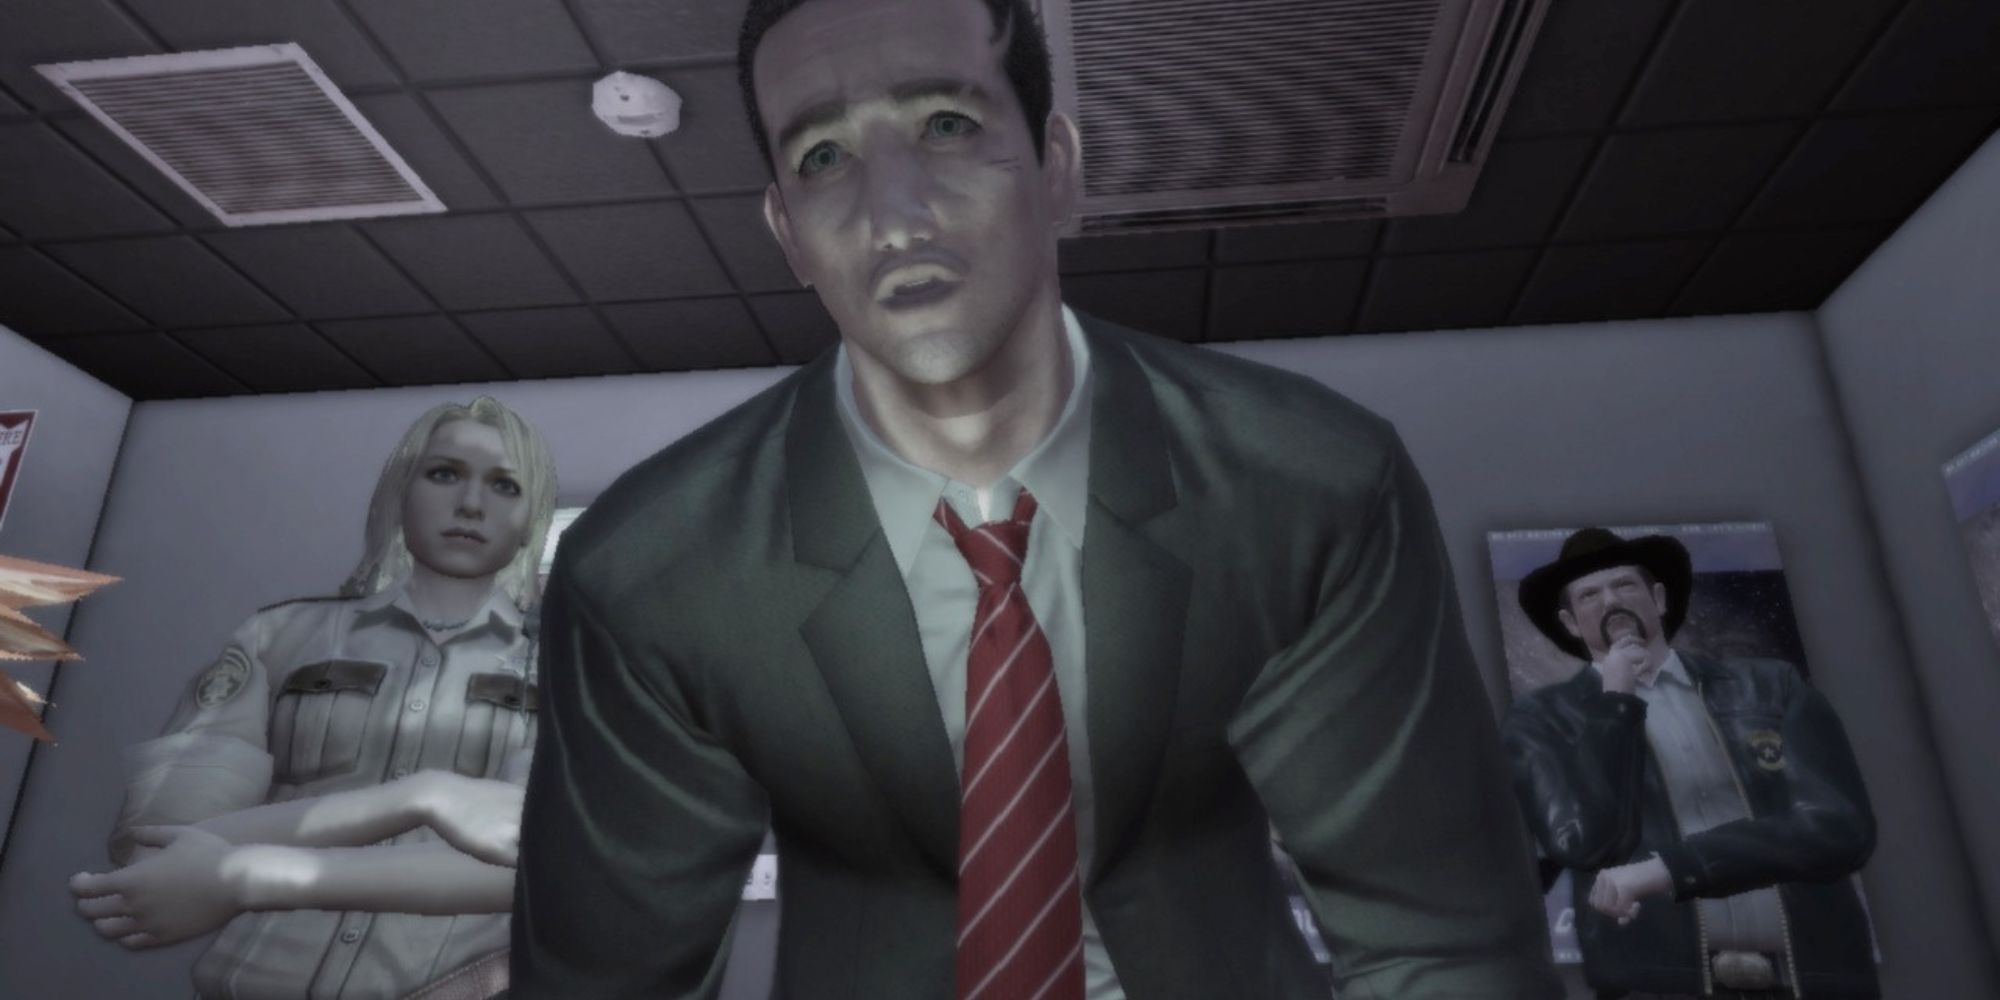 Deadly Premonition Francis York Morgan leans forward with Emily and George behind him